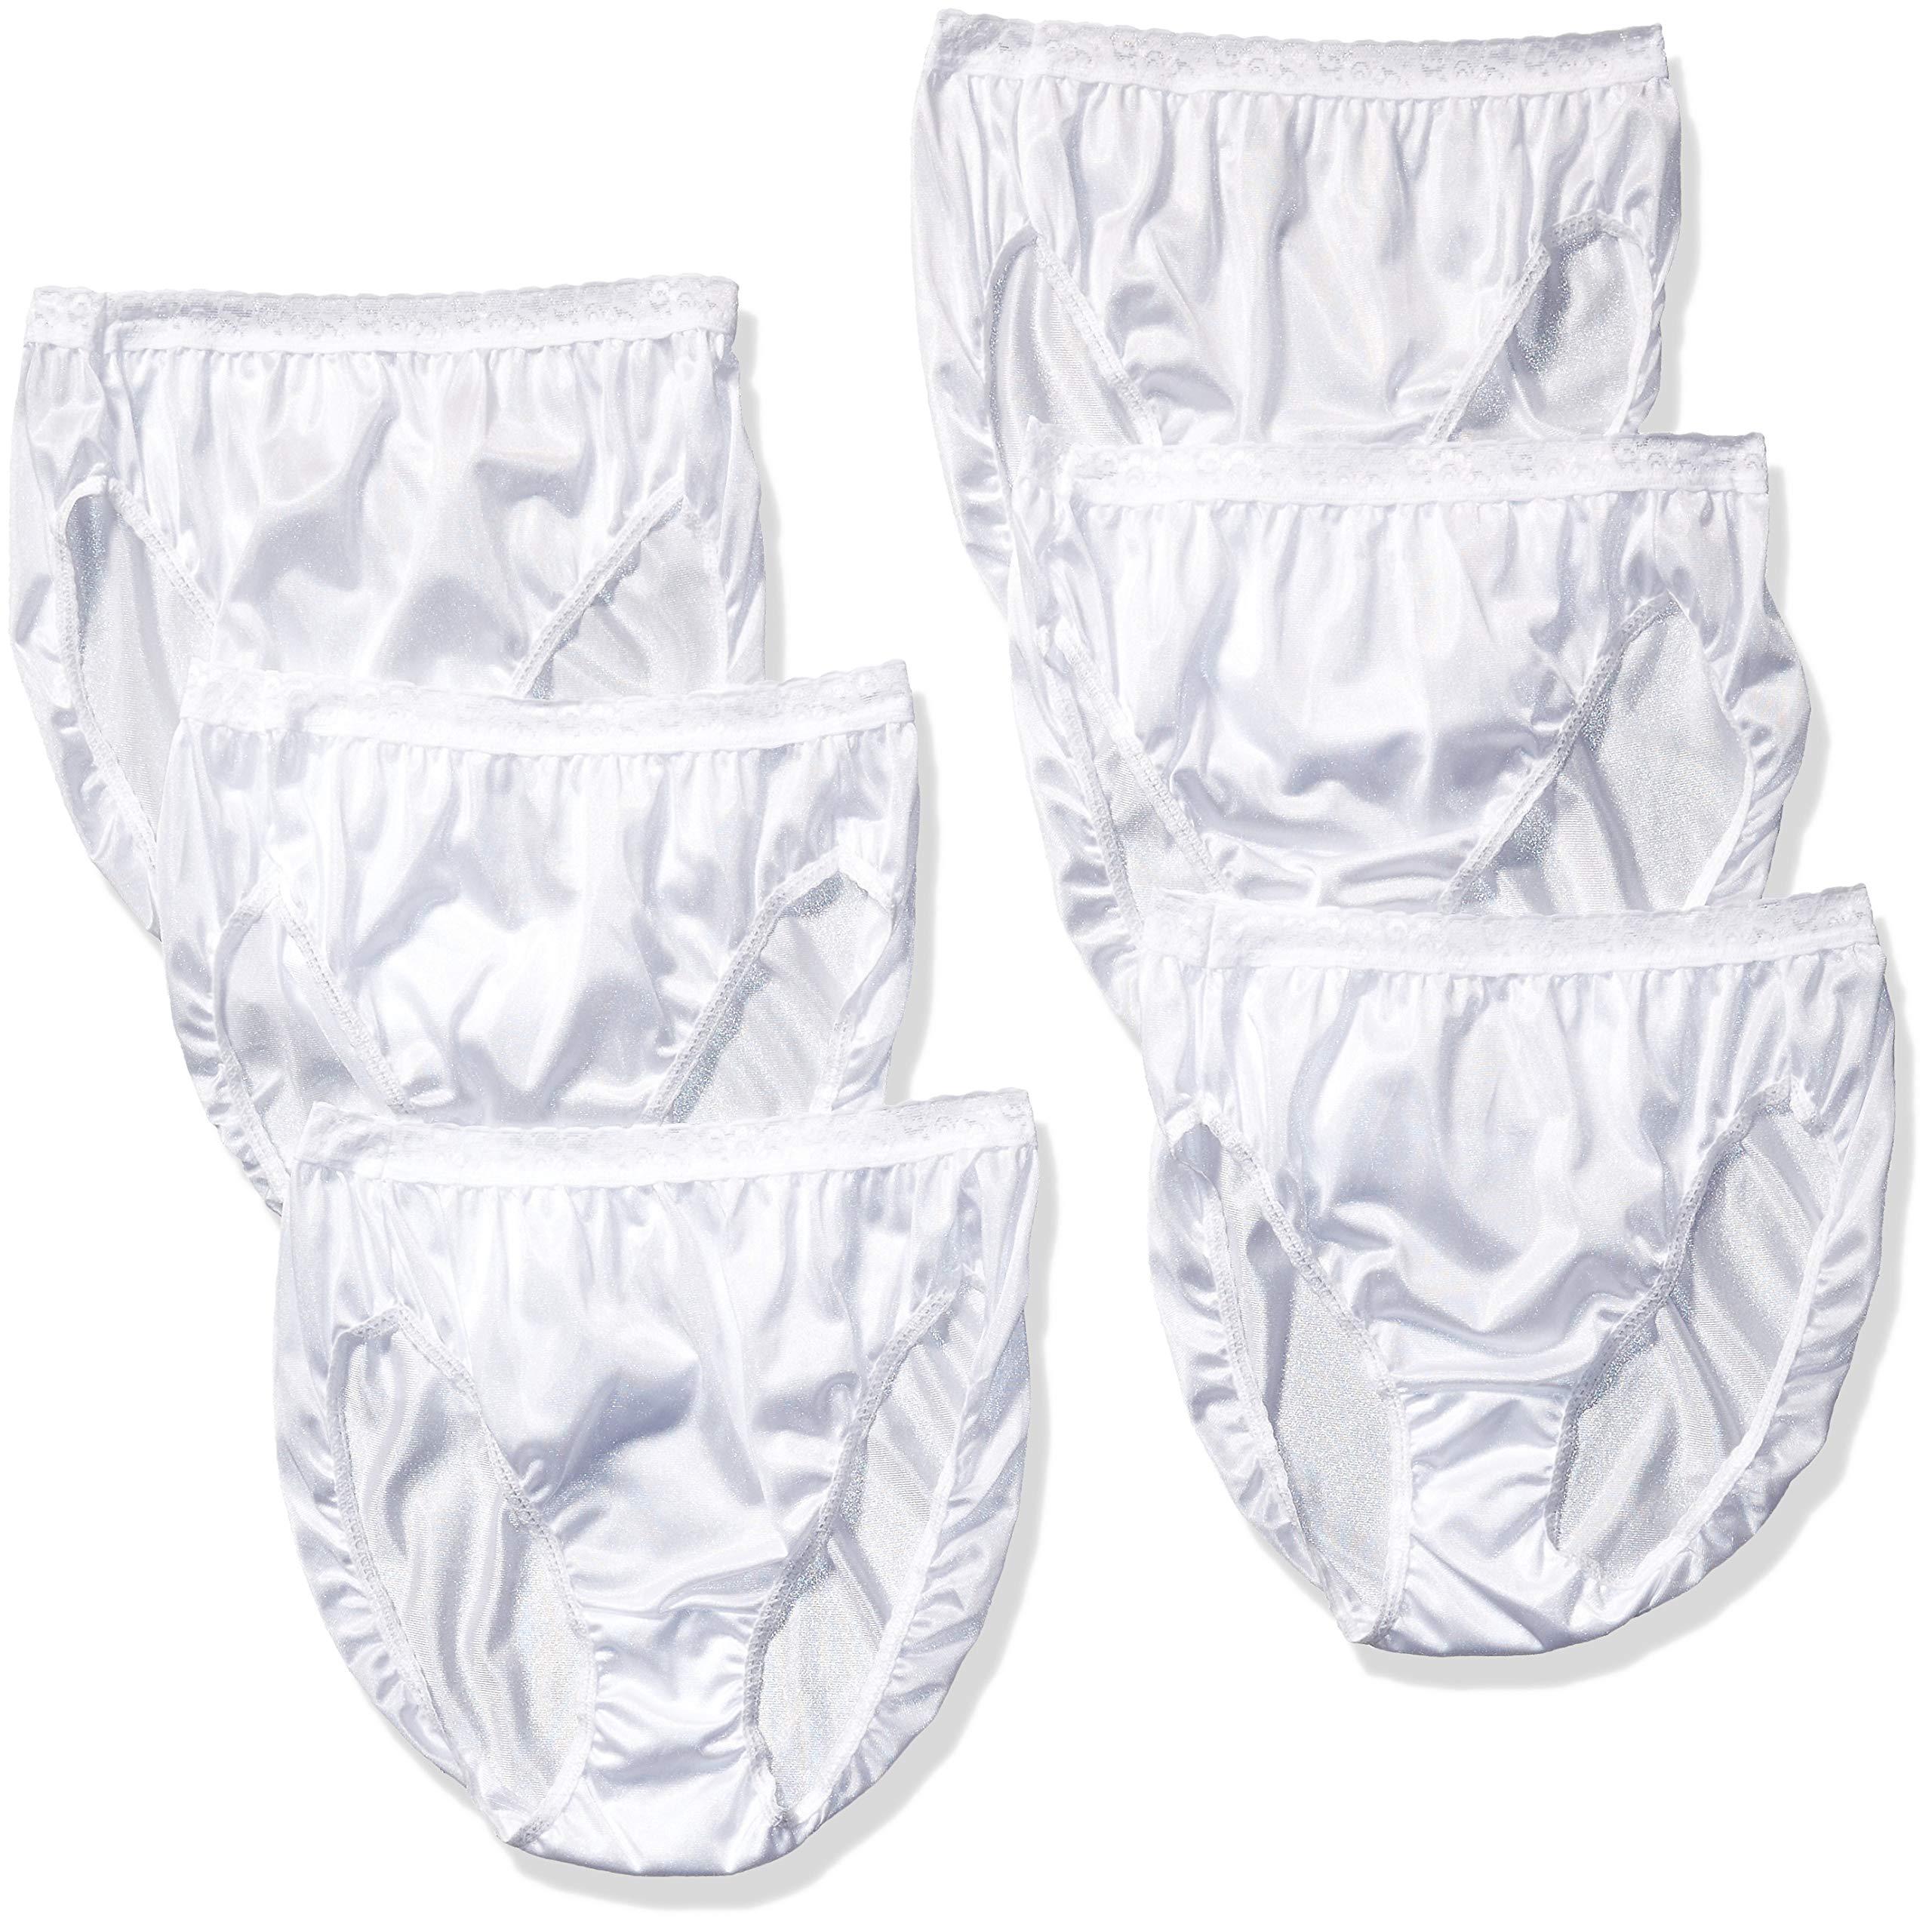 Hanes Women's No Ride Up Cotton Brief 6-Pack, White, 8 at  Women's  Clothing store